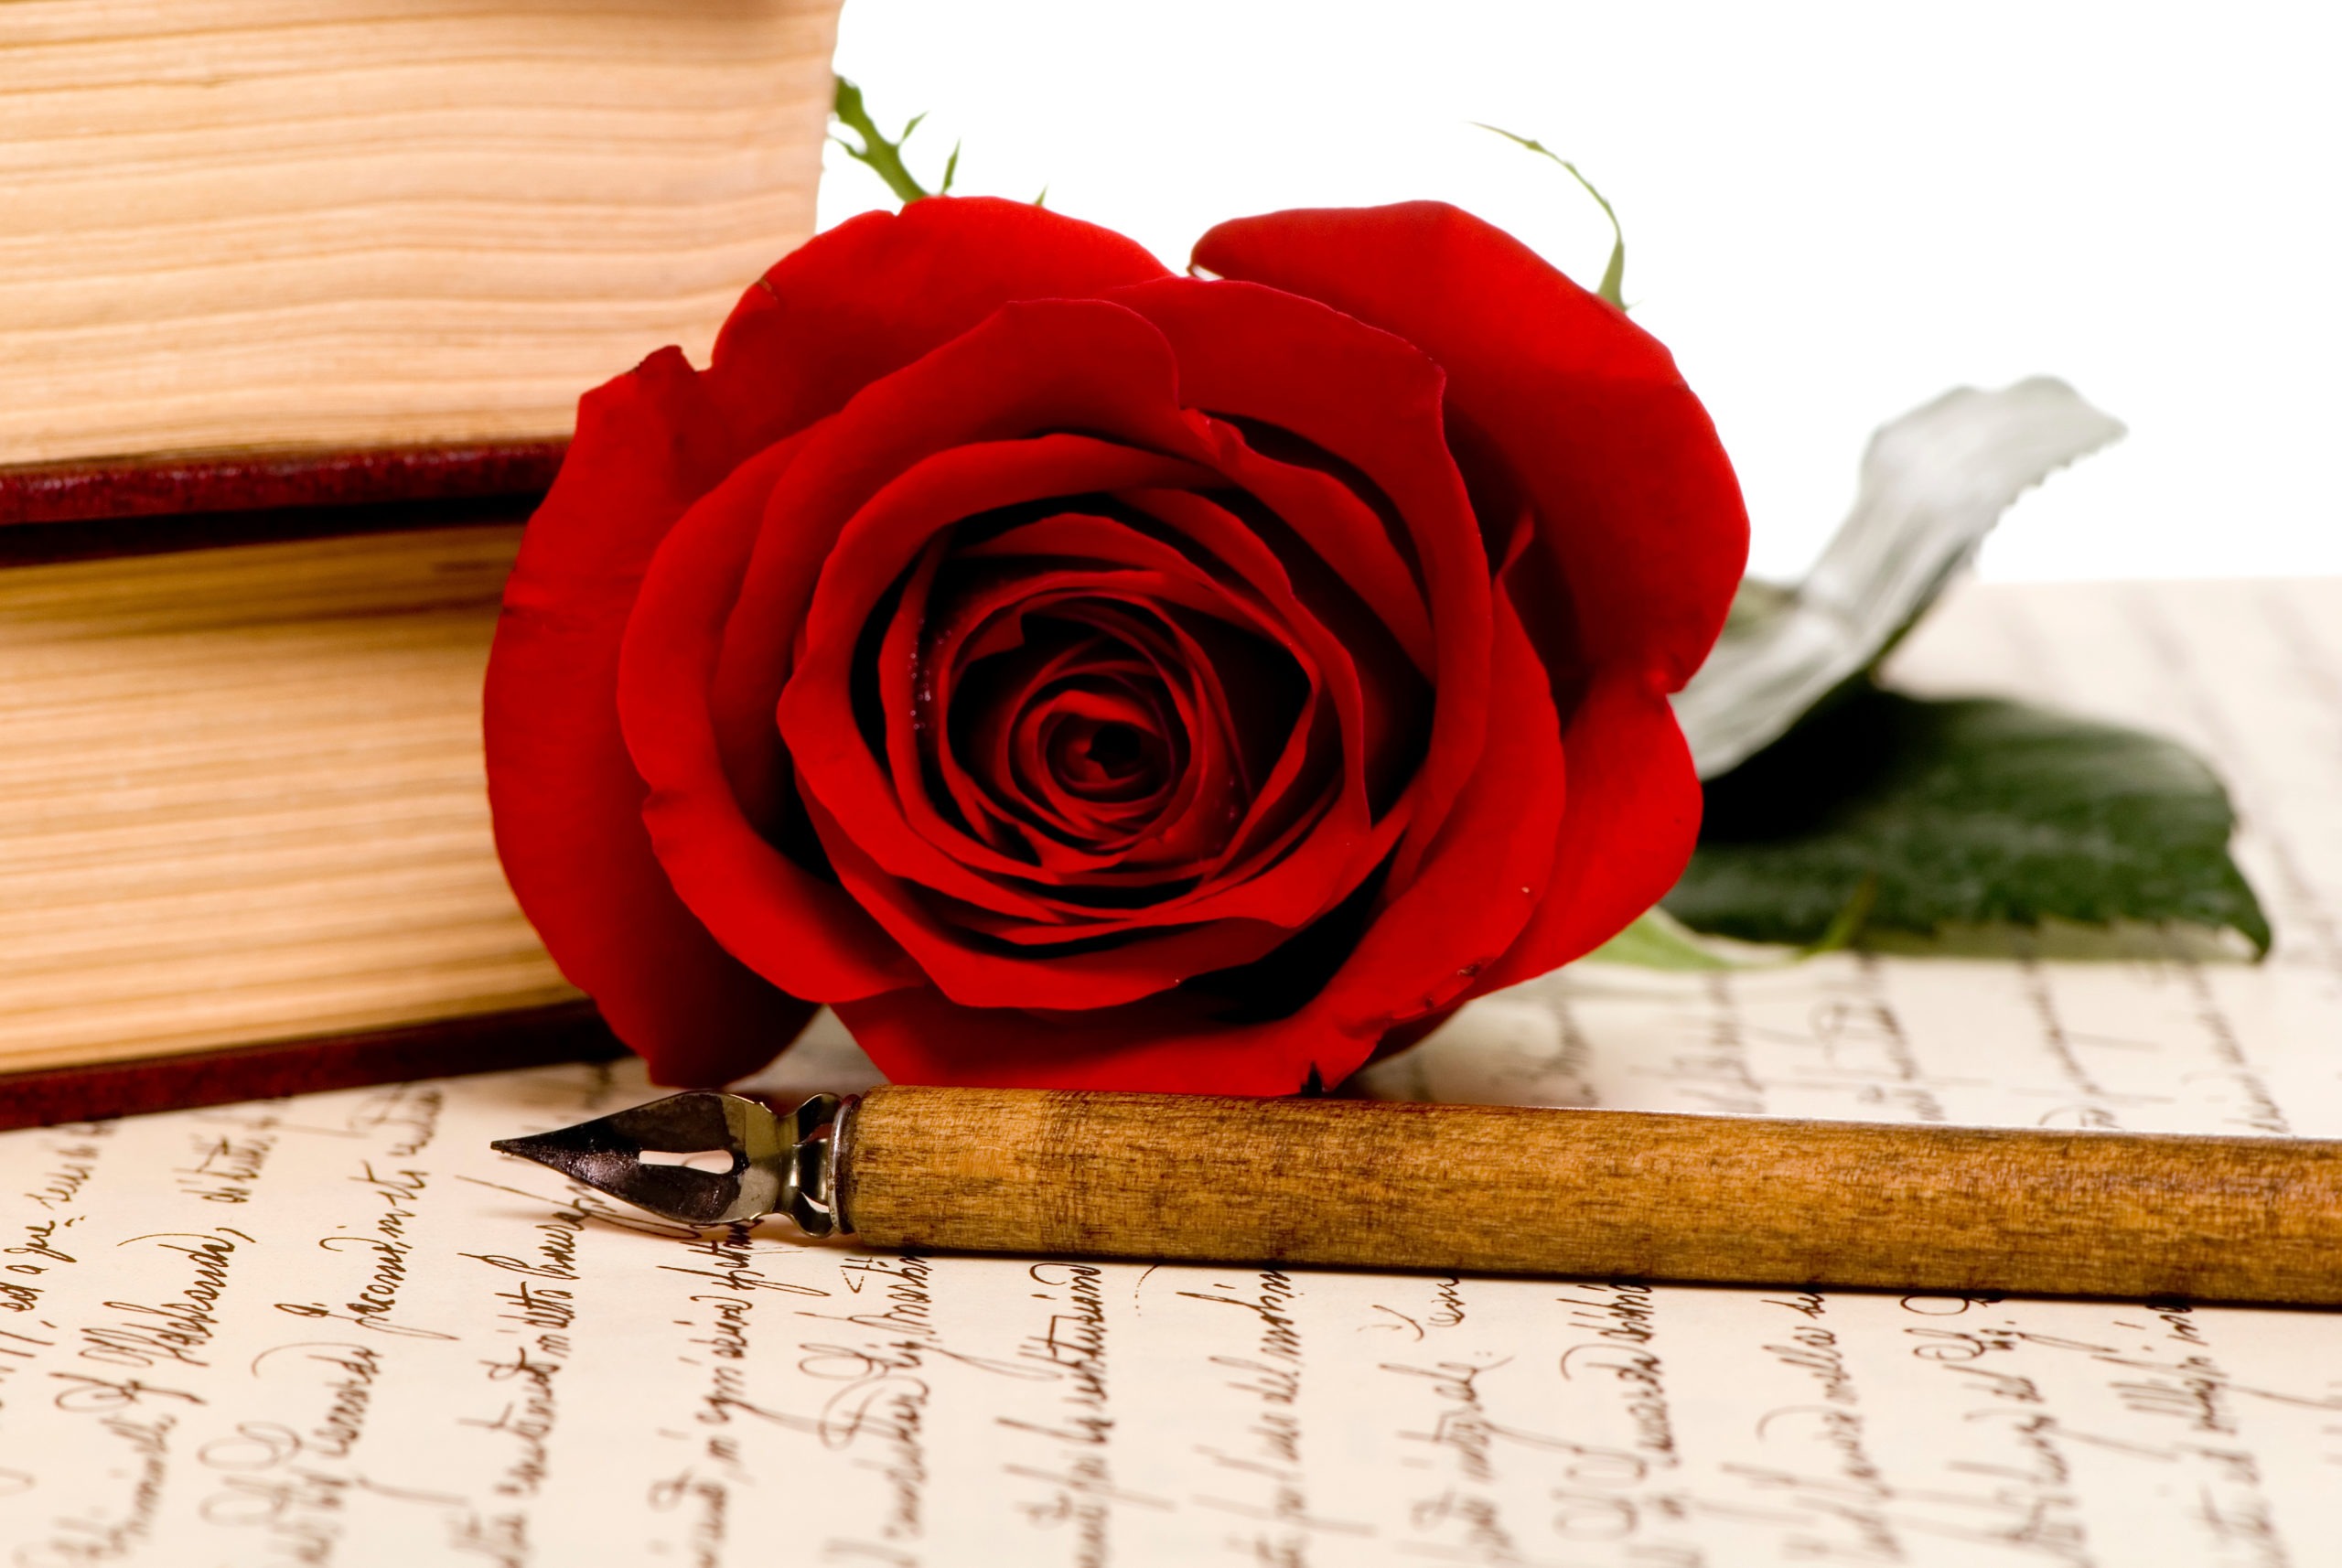 A letter and a rose